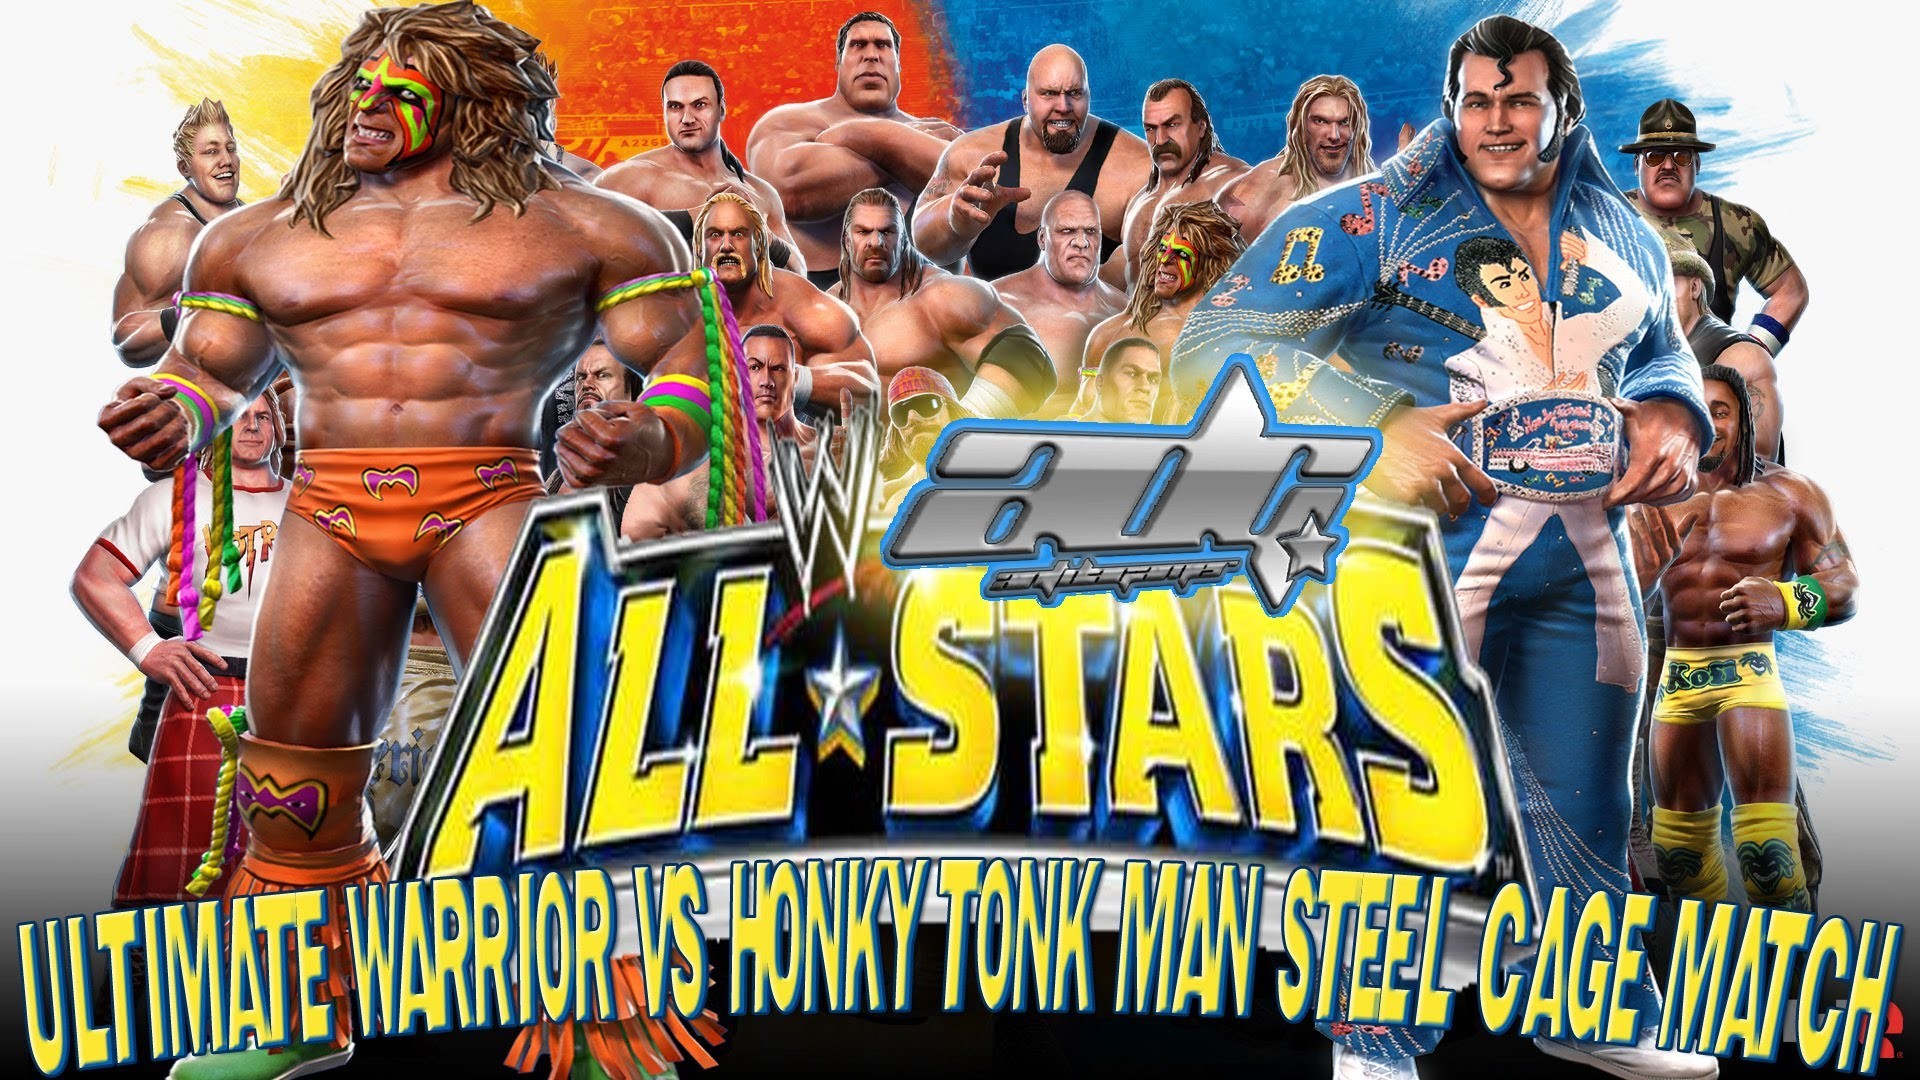 1920x1080 Silent But Deadly Games - WWE All-Stars: Ultimate Warrior vs Honky Tonk Man  Steel Cage Match - YouTube